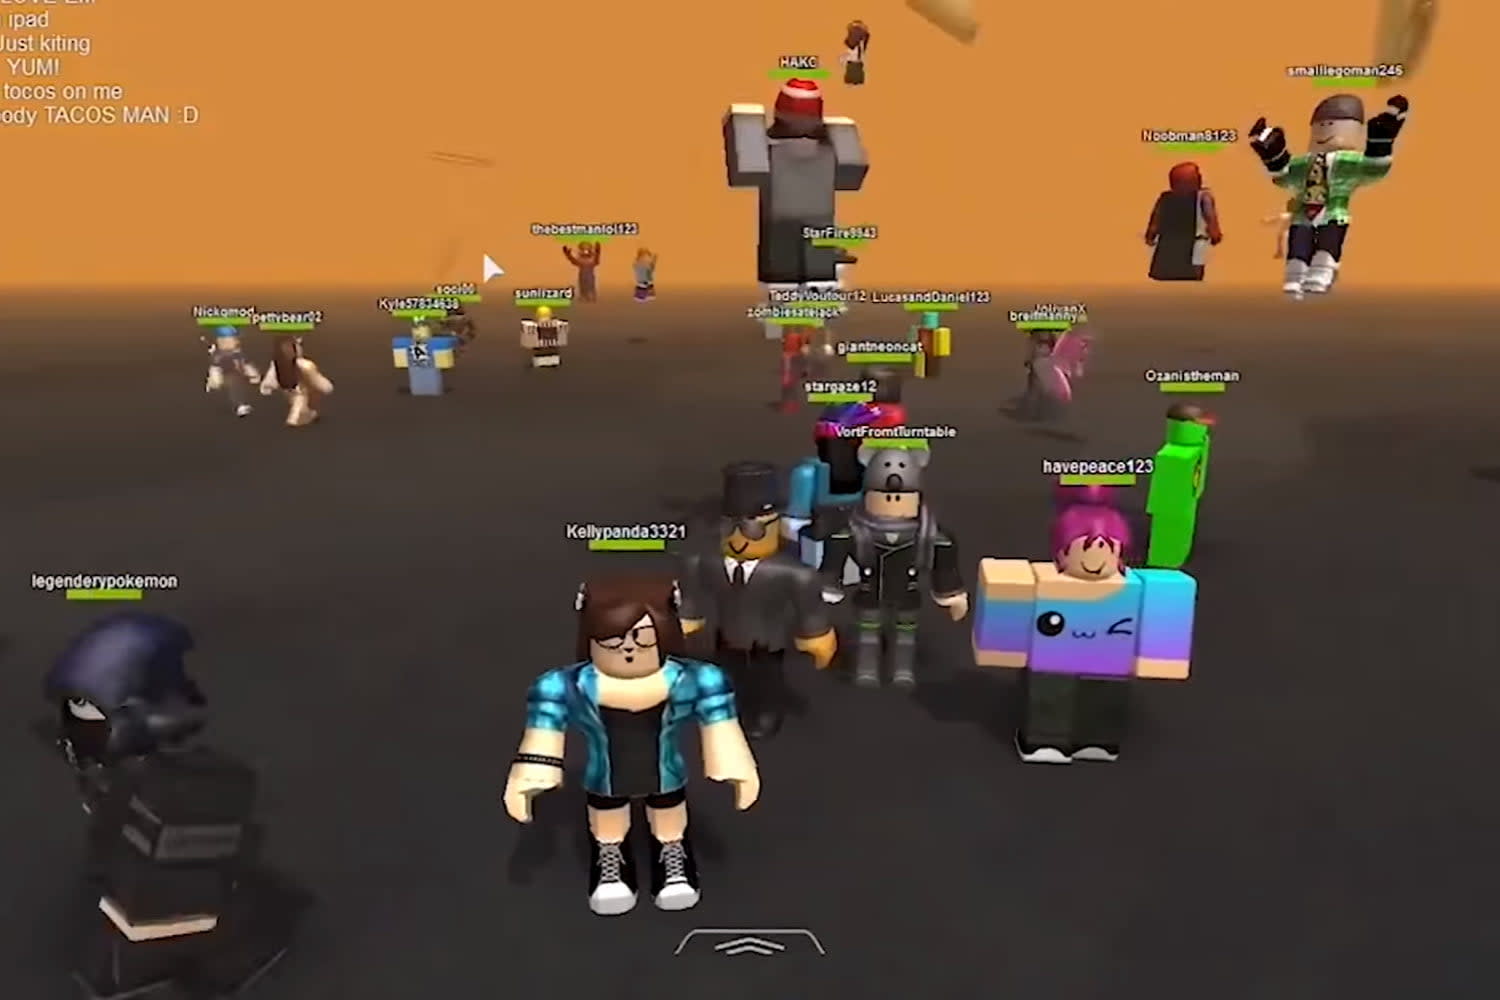 Malware Cleverly Weaponizes Discord To Steal Game Currency From Roblox Players - buy 80 robux on pc business breaking news